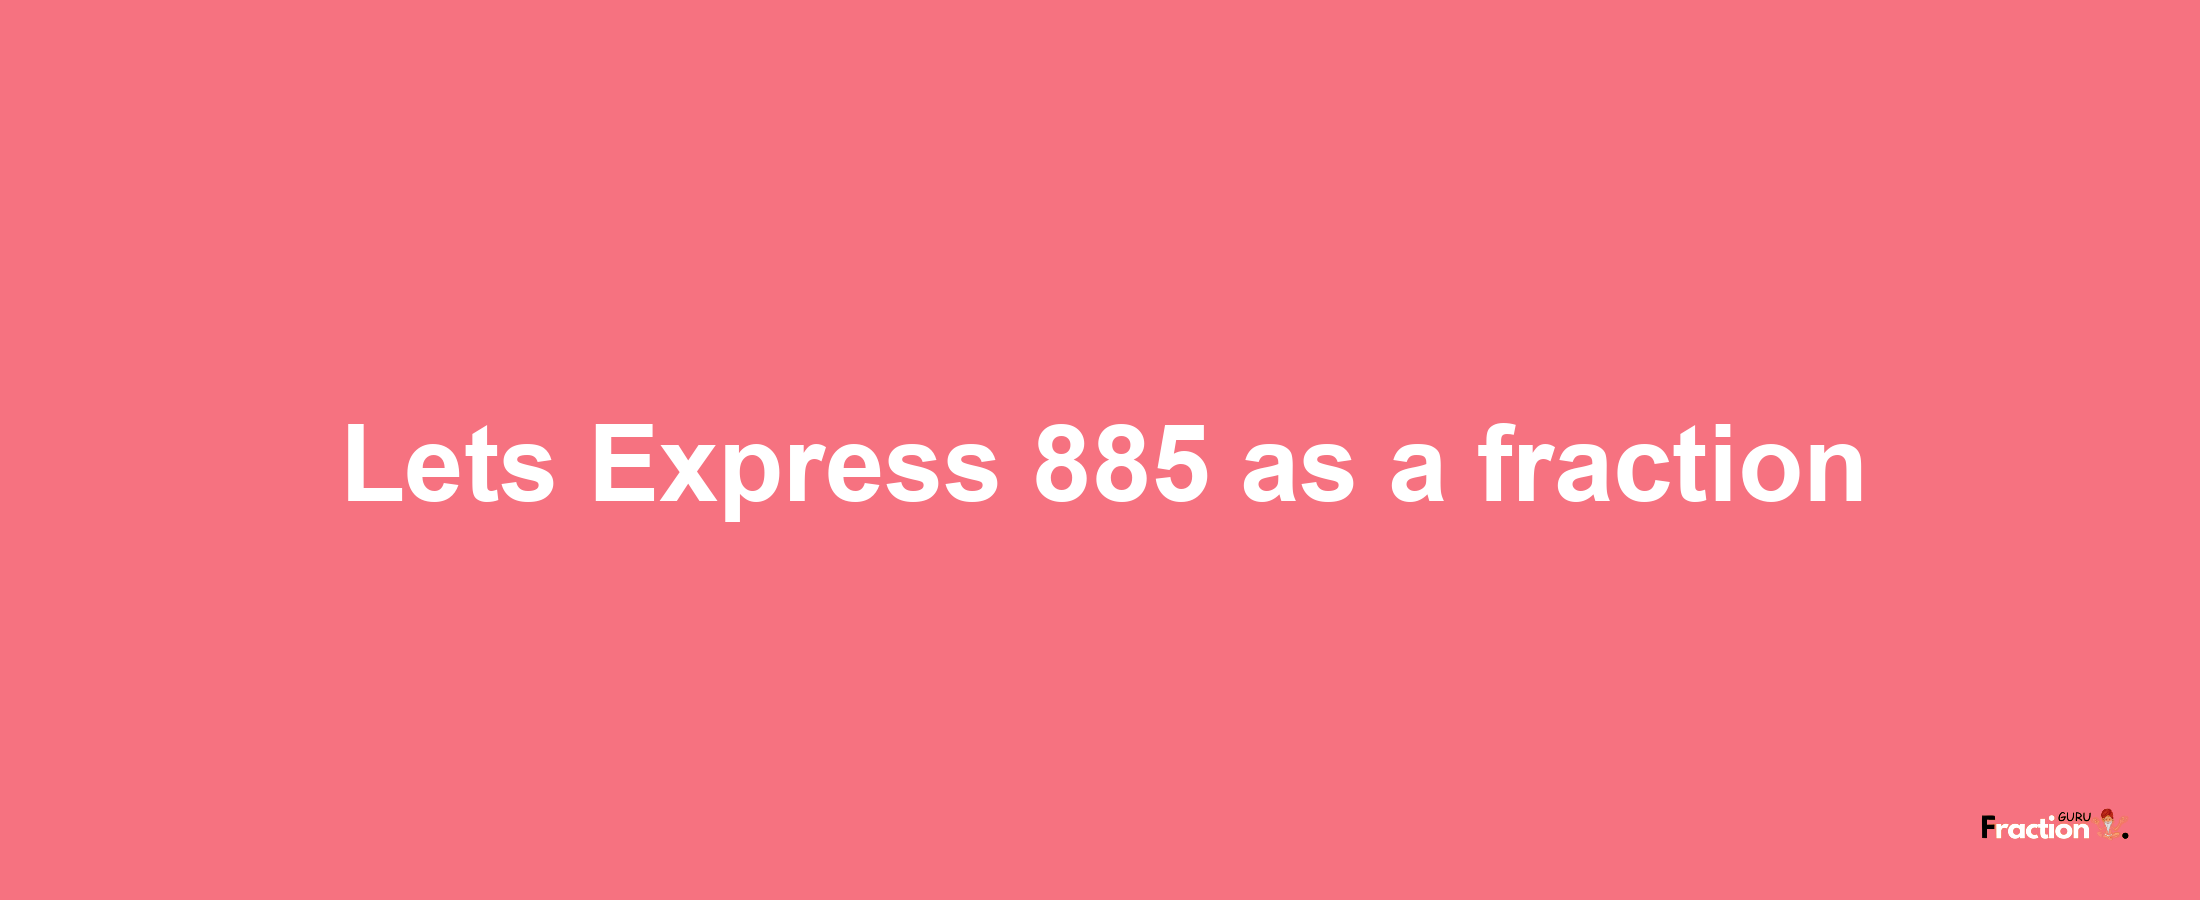 Lets Express 885 as afraction